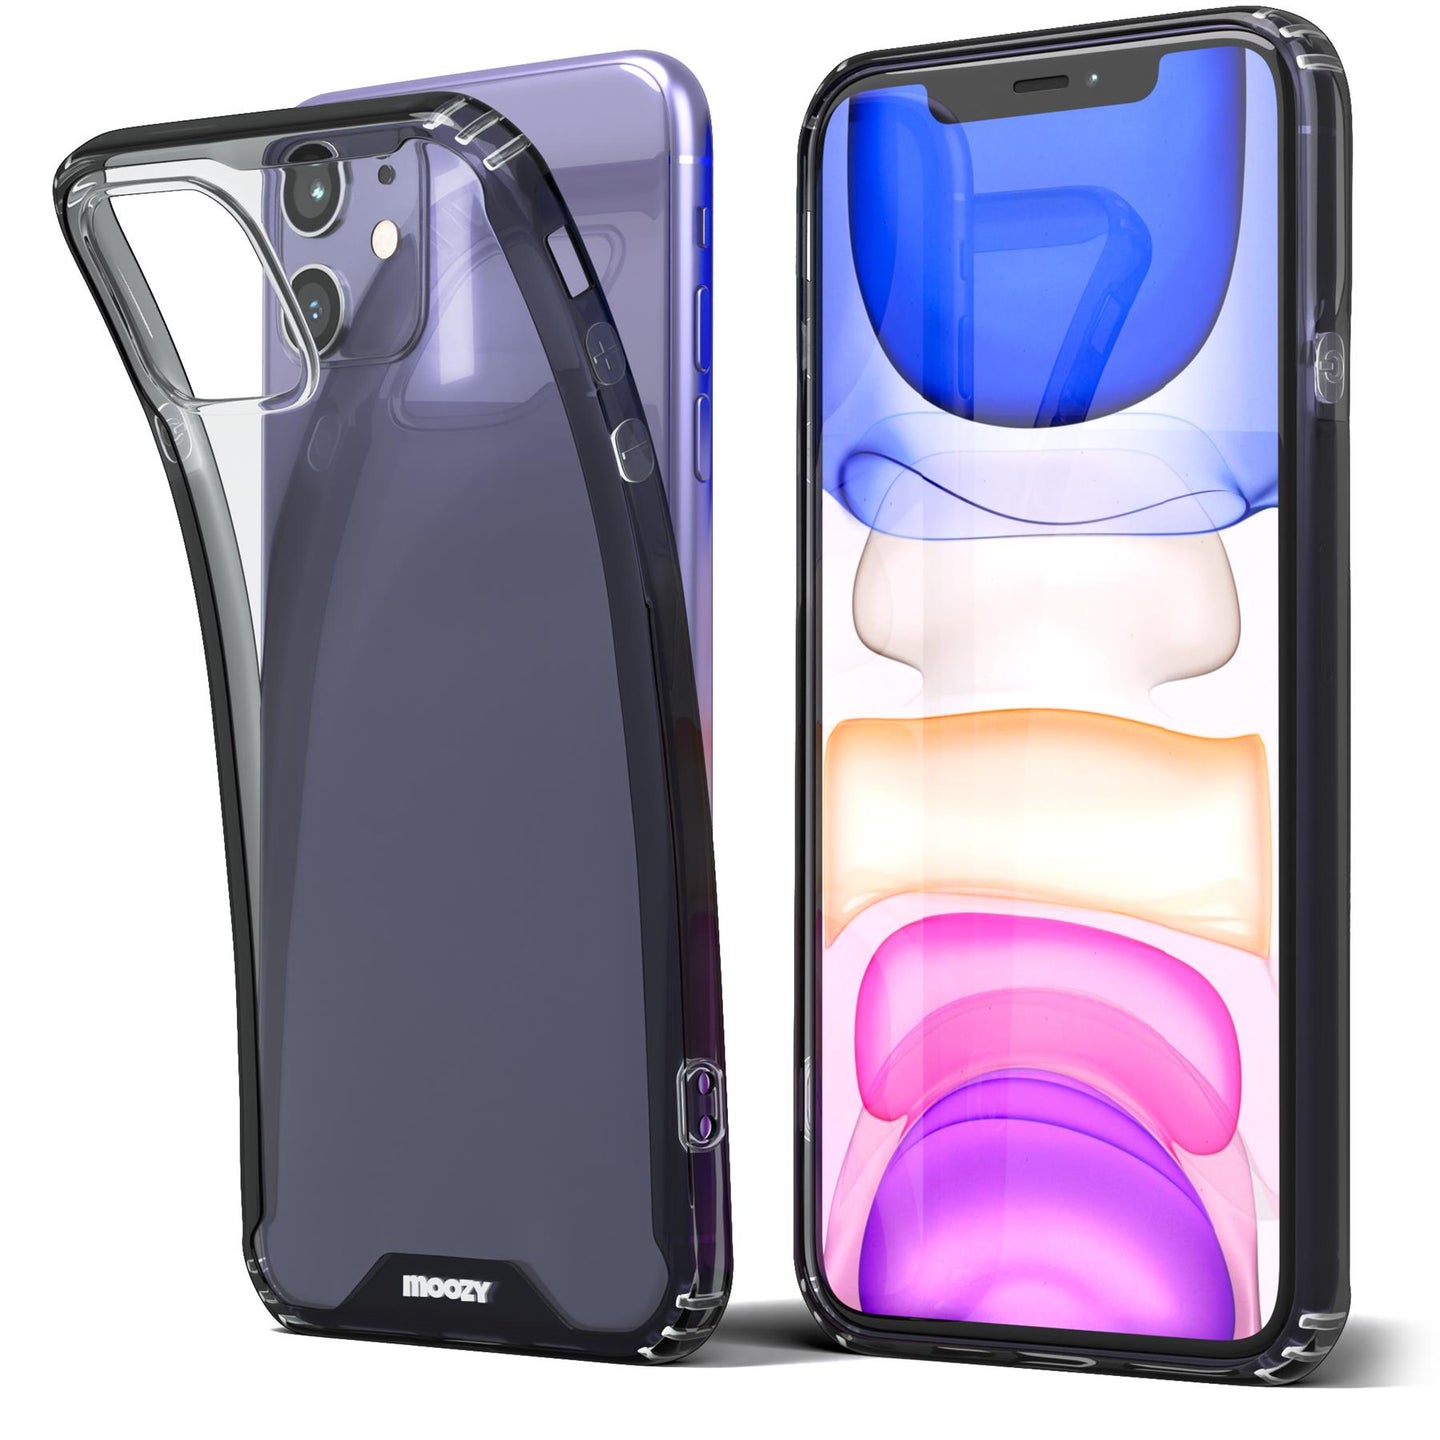 Moozy Xframe Shockproof Case for iPhone 11 - Black Rim Transparent Case, Double Colour Clear Hybrid Cover with Shock Absorbing TPU Rim